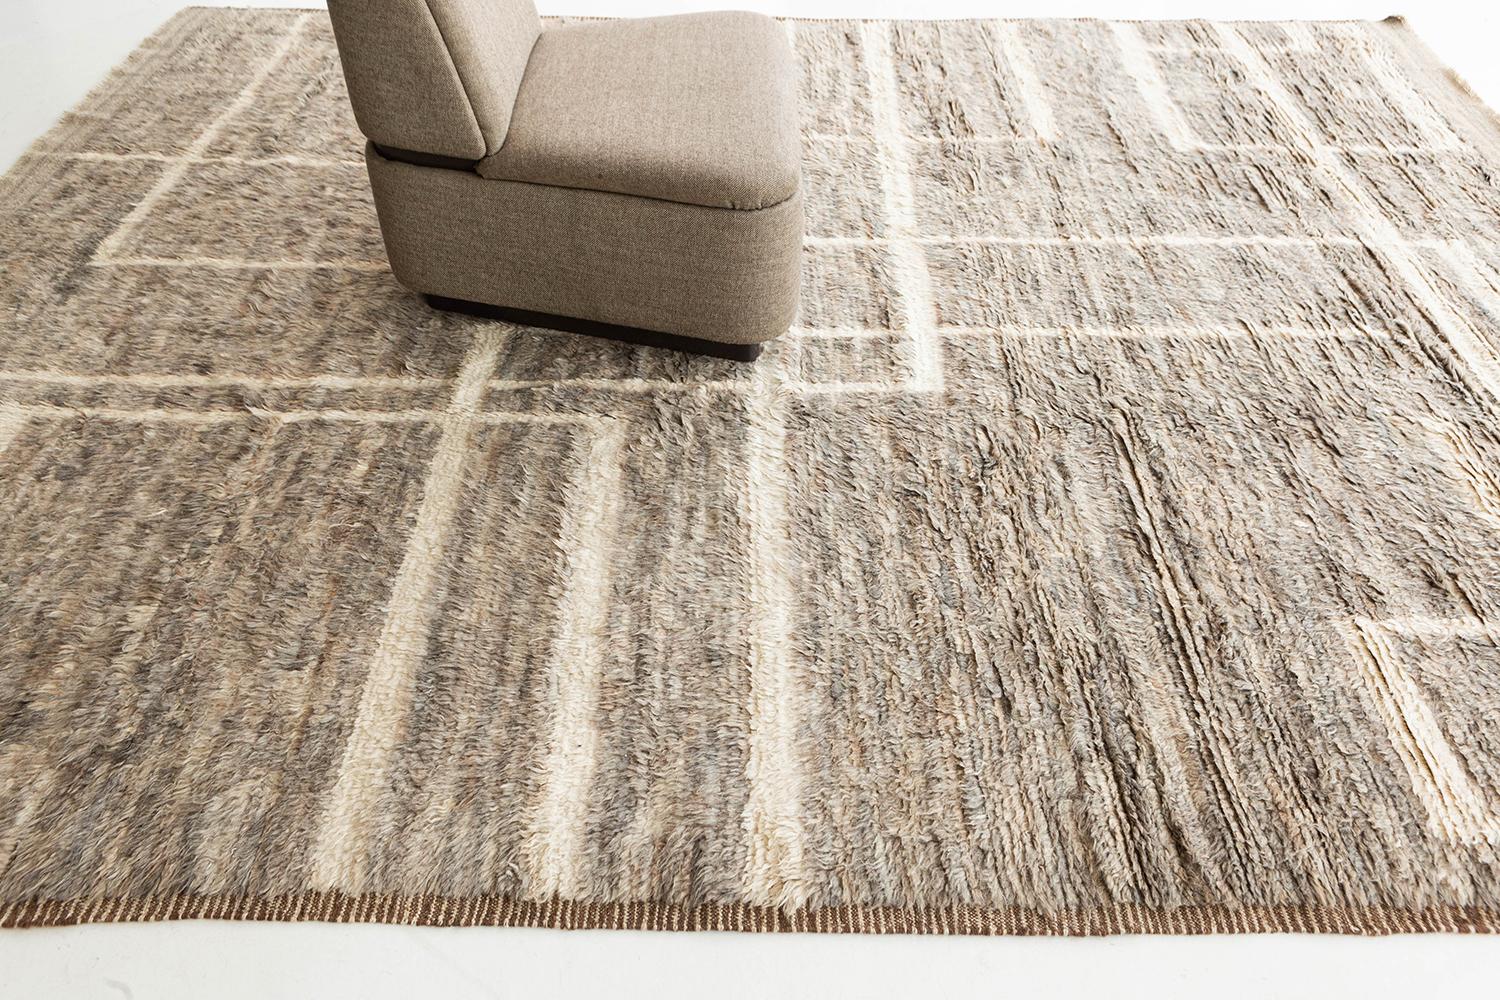 A contemporary natural dye Moroccan inspired rug from our Atlas Collection. This natural taupe-gray wool pile weave is adorned with interlocking ivory lines. A beautiful pile weave that will enhance any design space. 


Rug number 26926
Size 9'